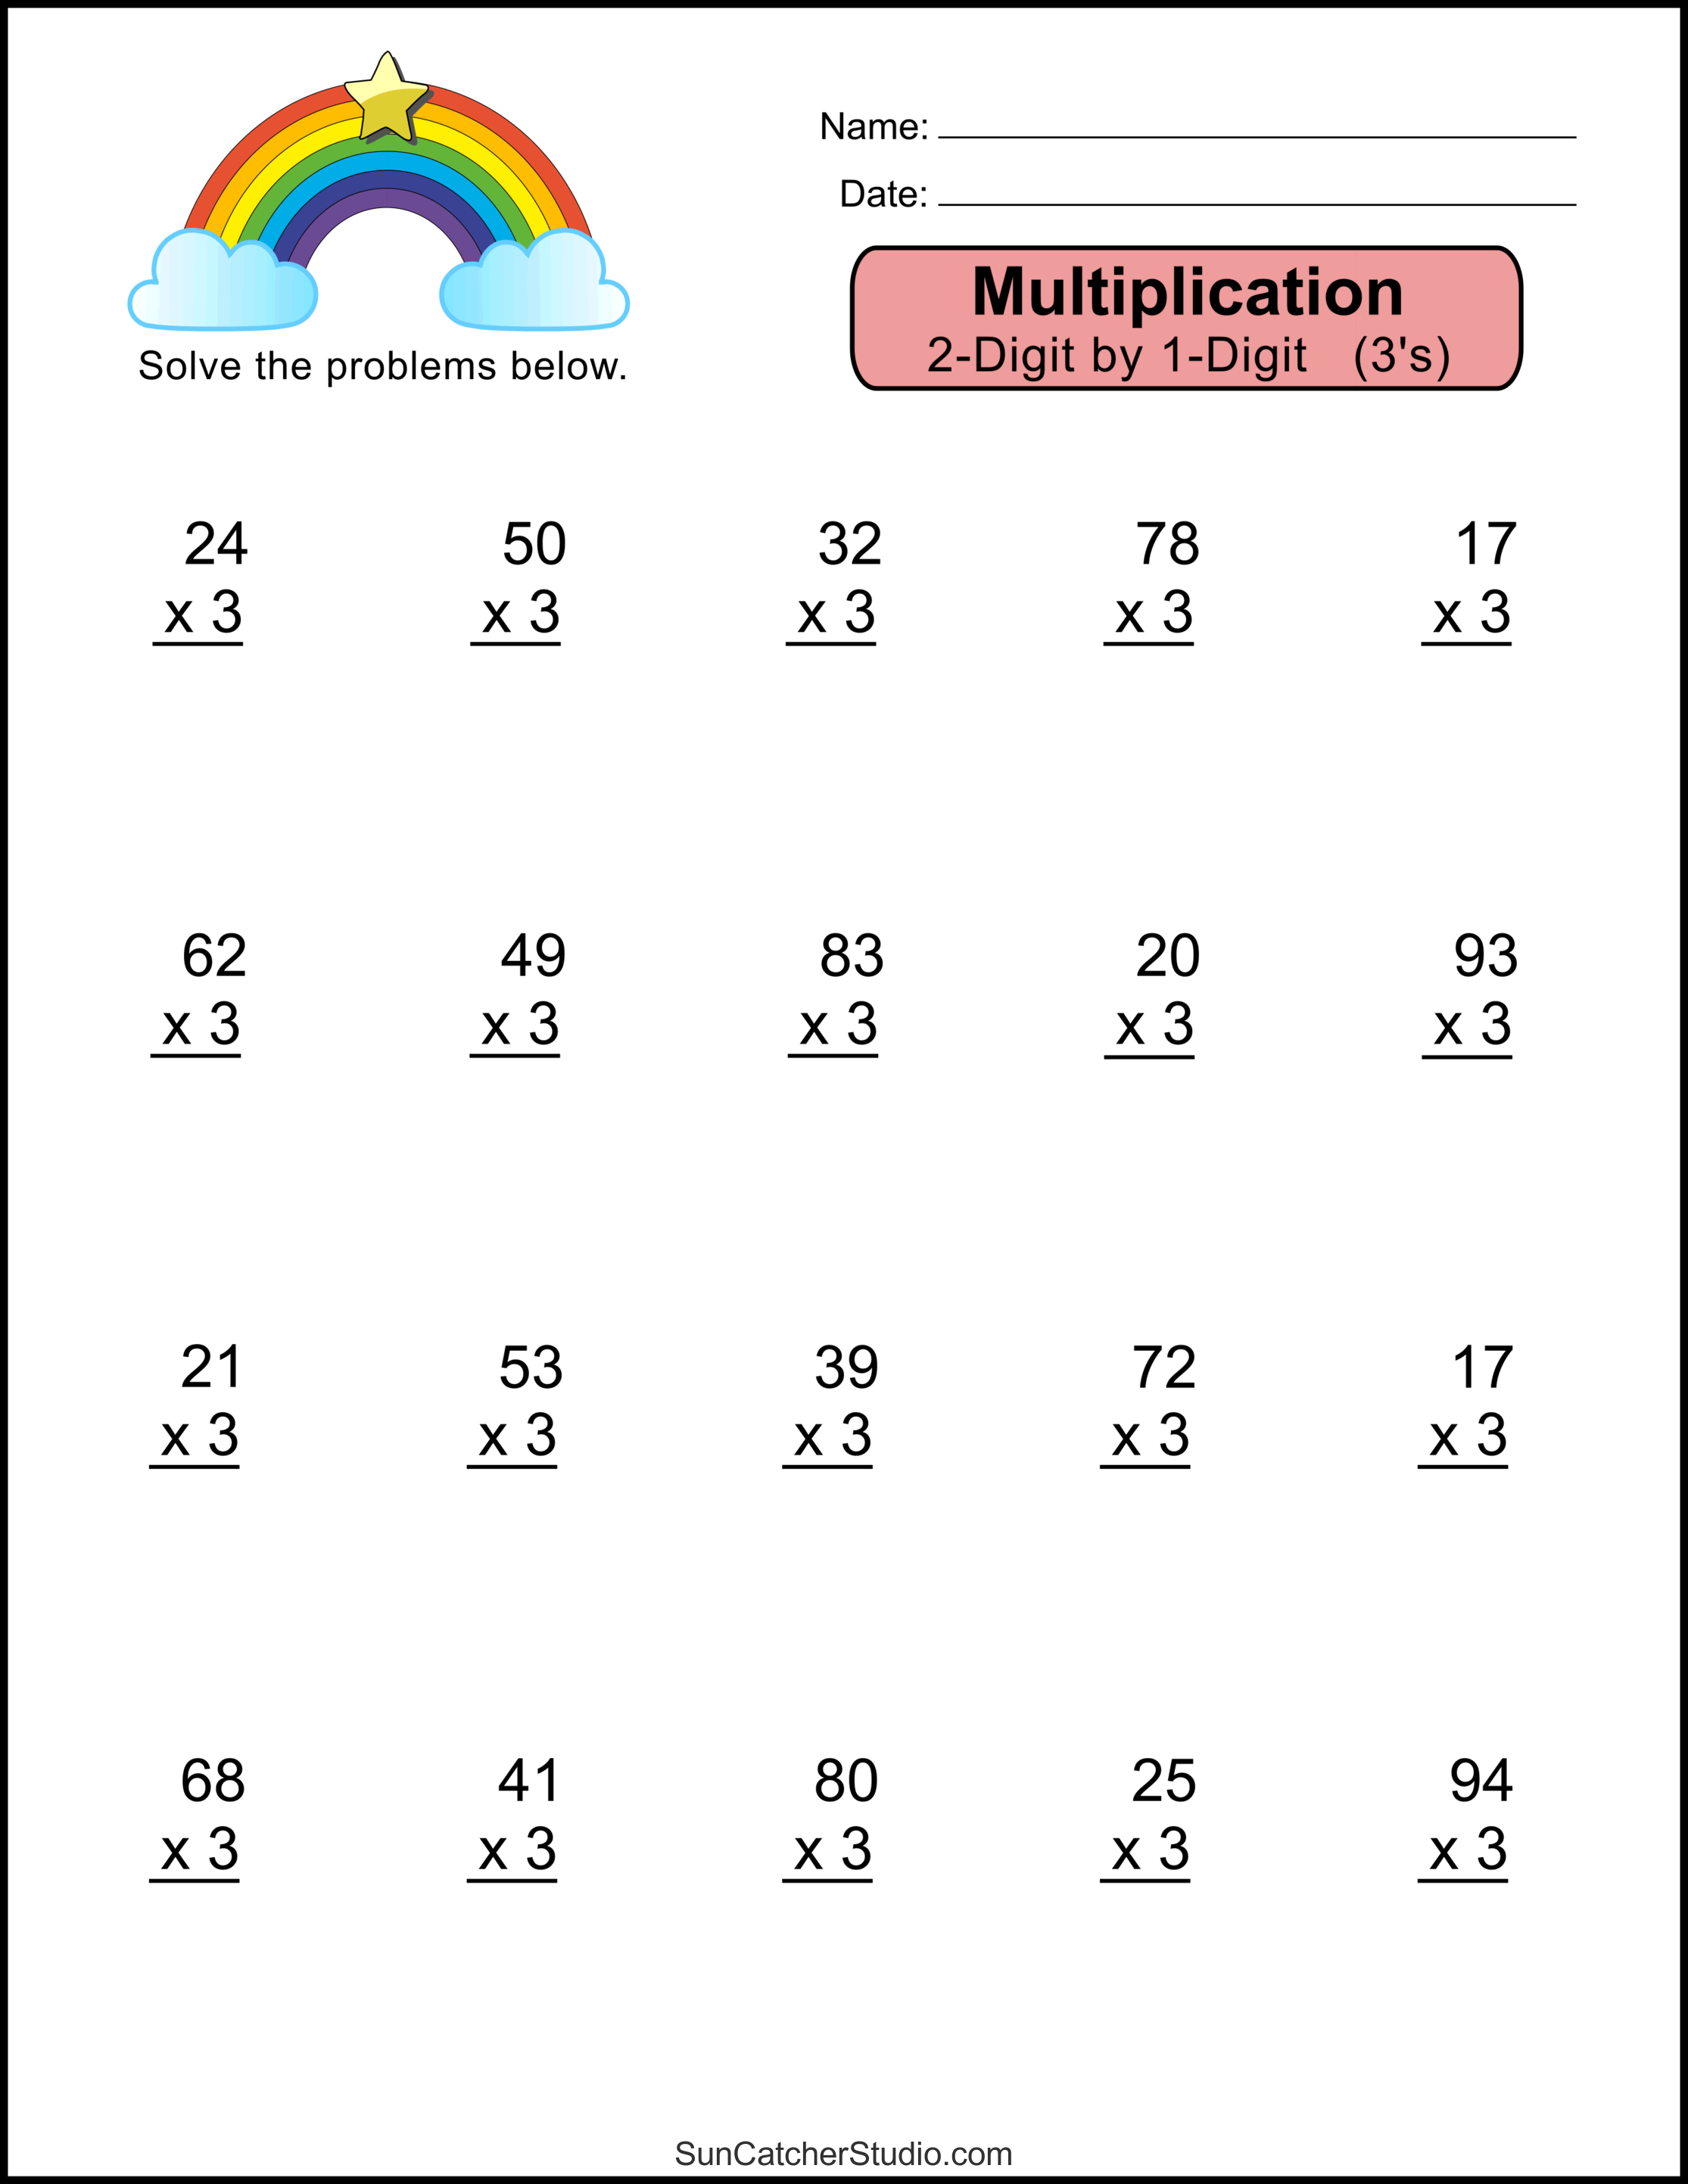 Multiplication Worksheets 2 Digit By 1 Digit Math Drills DIY Projects Patterns Monograms Designs Templates